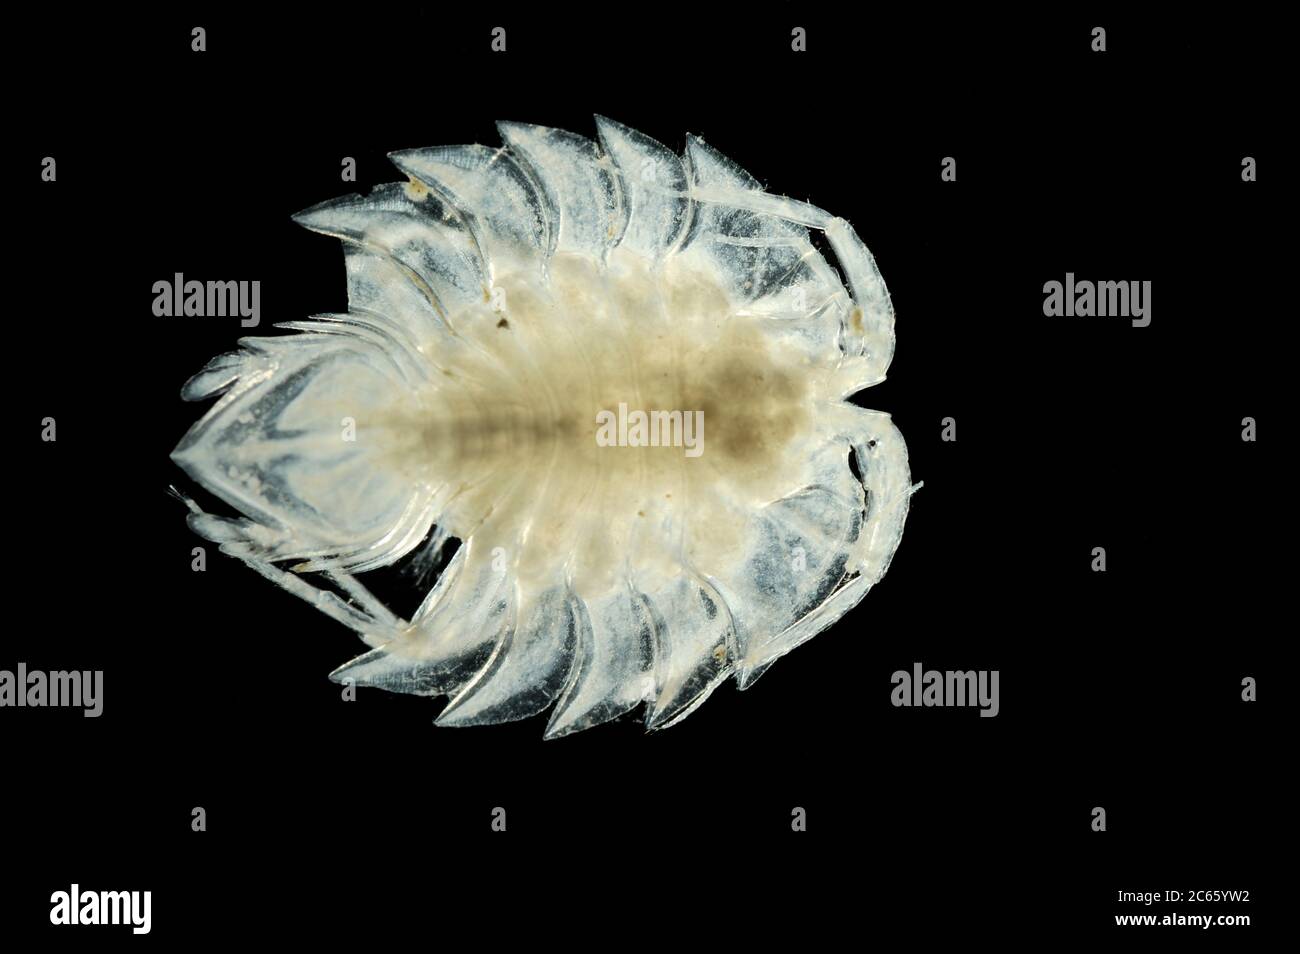 isopod (Frontoserolis abyssalis) Picture was taken in cooperation with the Zoological Museum University of Hamburg Stock Photo